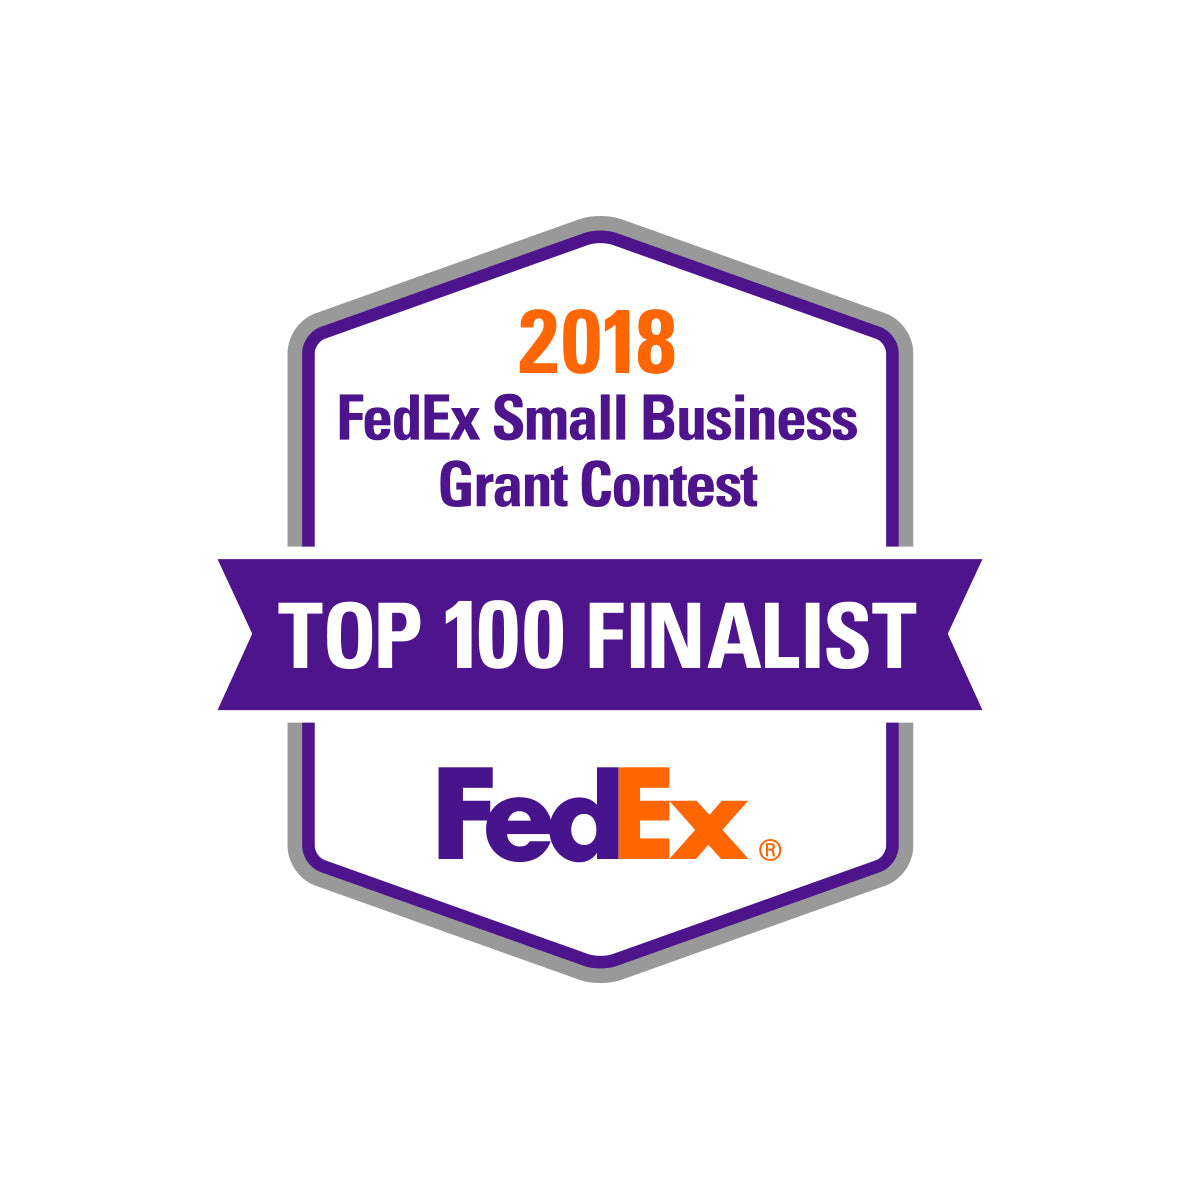 THE COMFY CUP CHRONICLES PART 47: FedEx Small Business Grant Contest Top 100 Finalist